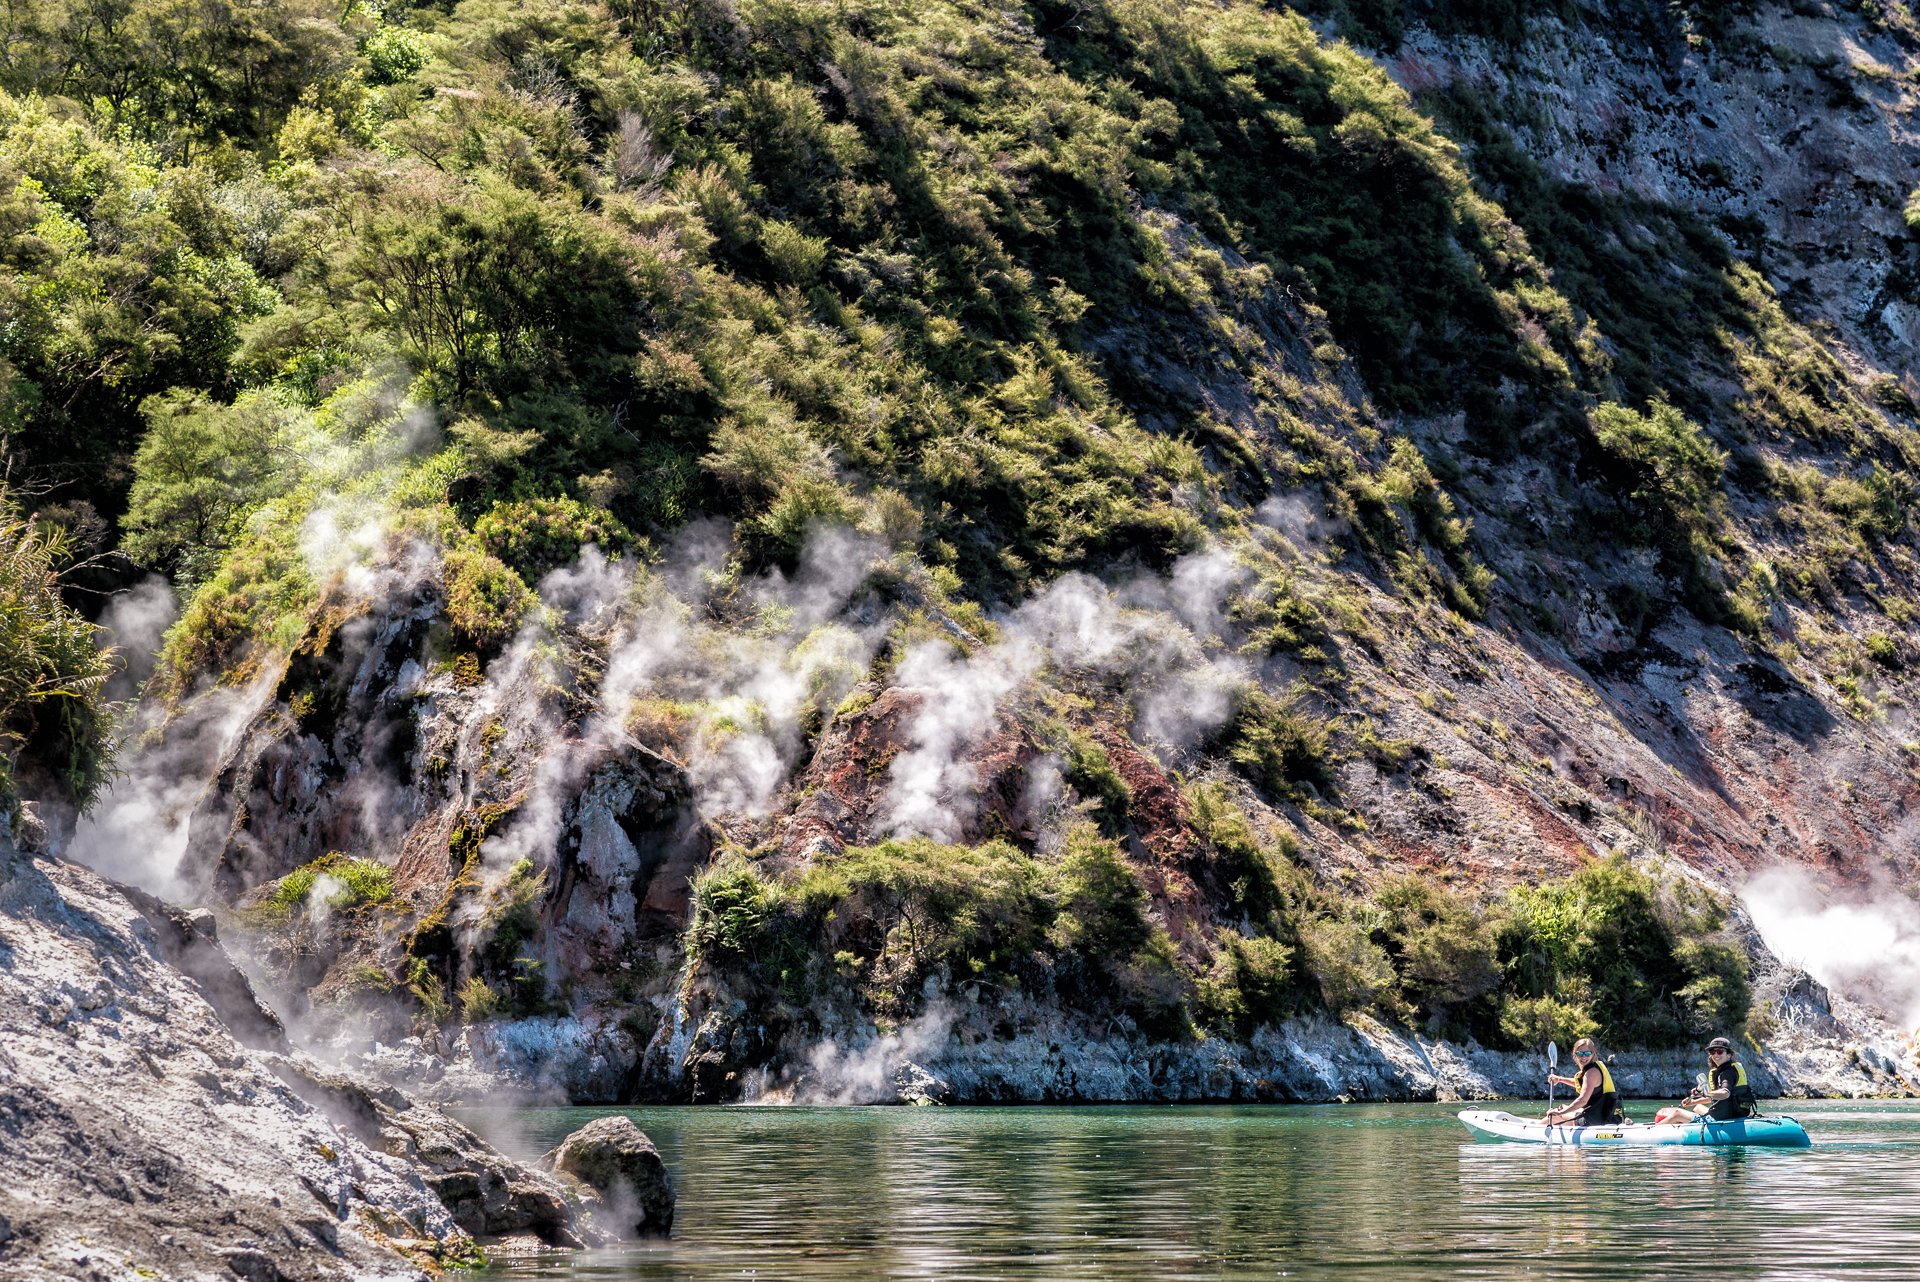 Kayakers dwarfed by the imposing Steaming Cliffs.jpg